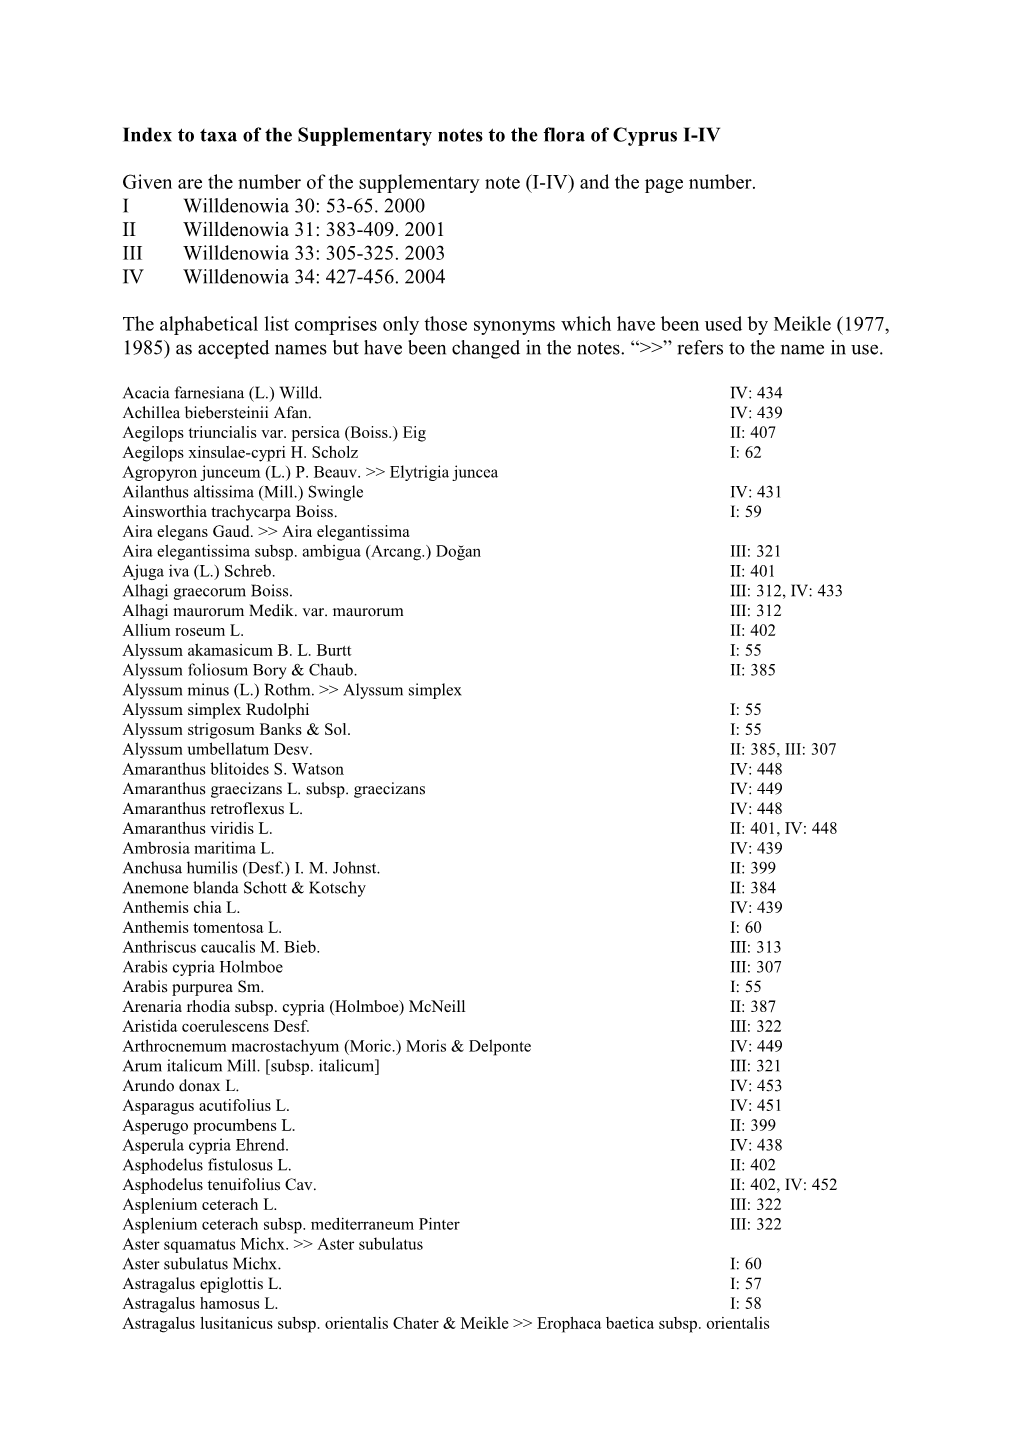 Index to Taxa of the Supplementary Notes to the Flora of Cyprus I-IV